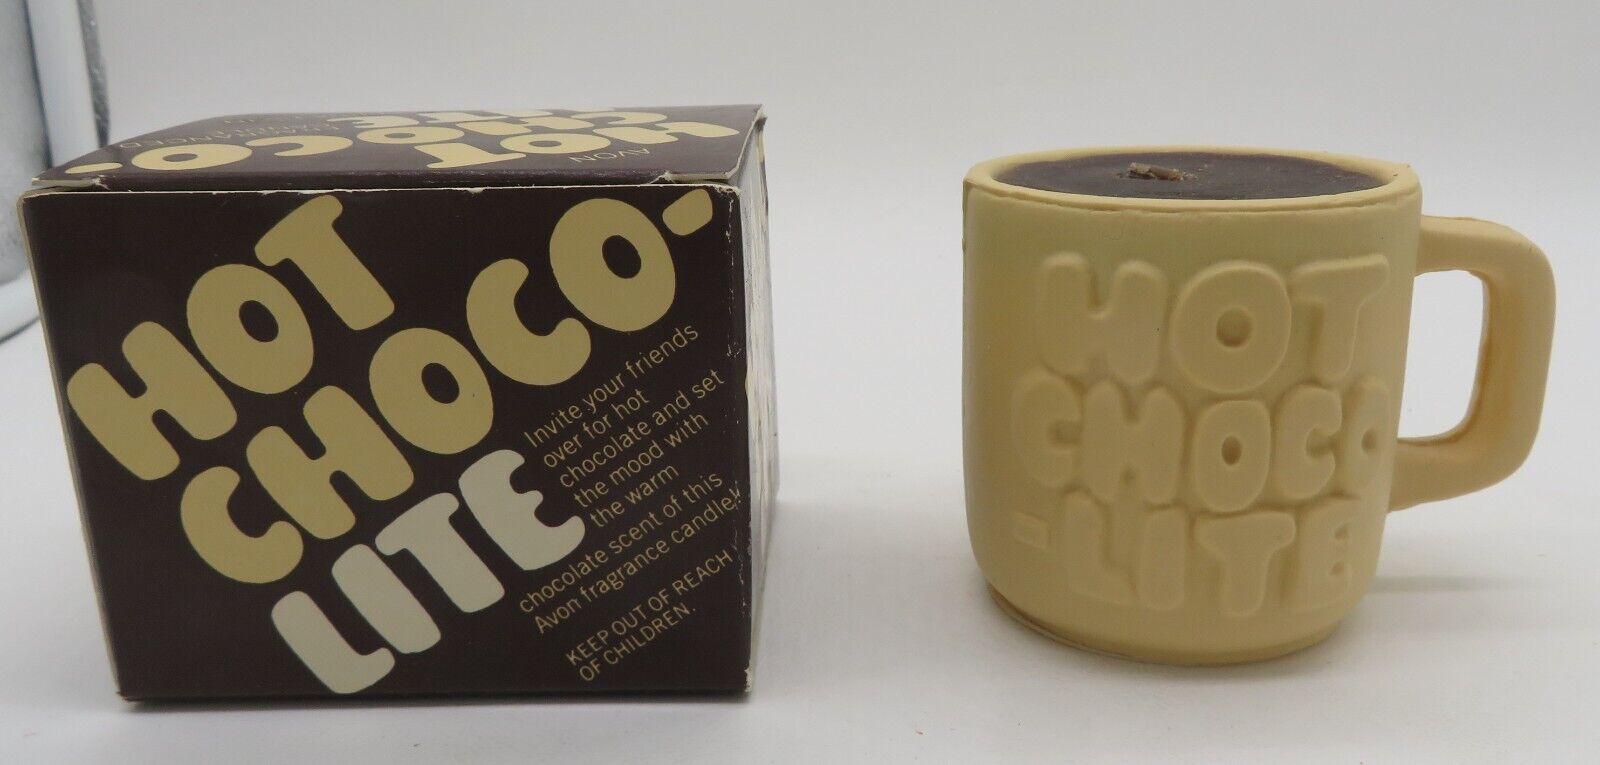 1981 Vintage Avon Hot Choco-lite Chocolate Scented Candle NOS